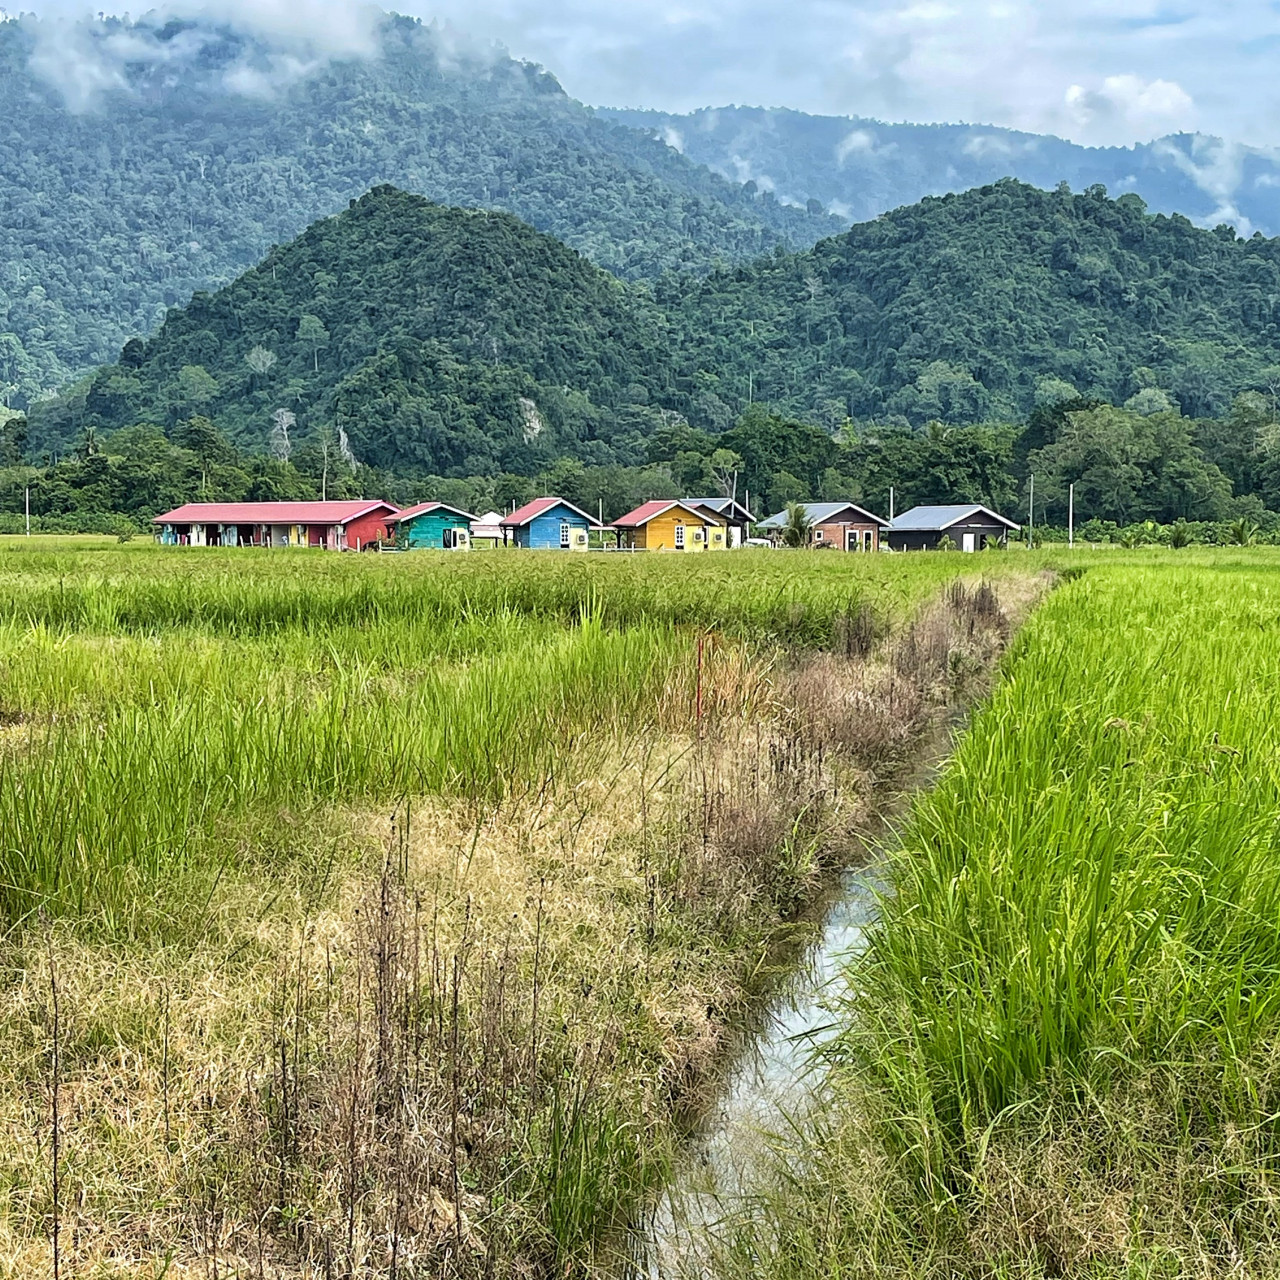 Surrounded by paddy fields, with lush tree covered hills and mountains providing an air of relaxation. – Pic by Shireen Zainudin